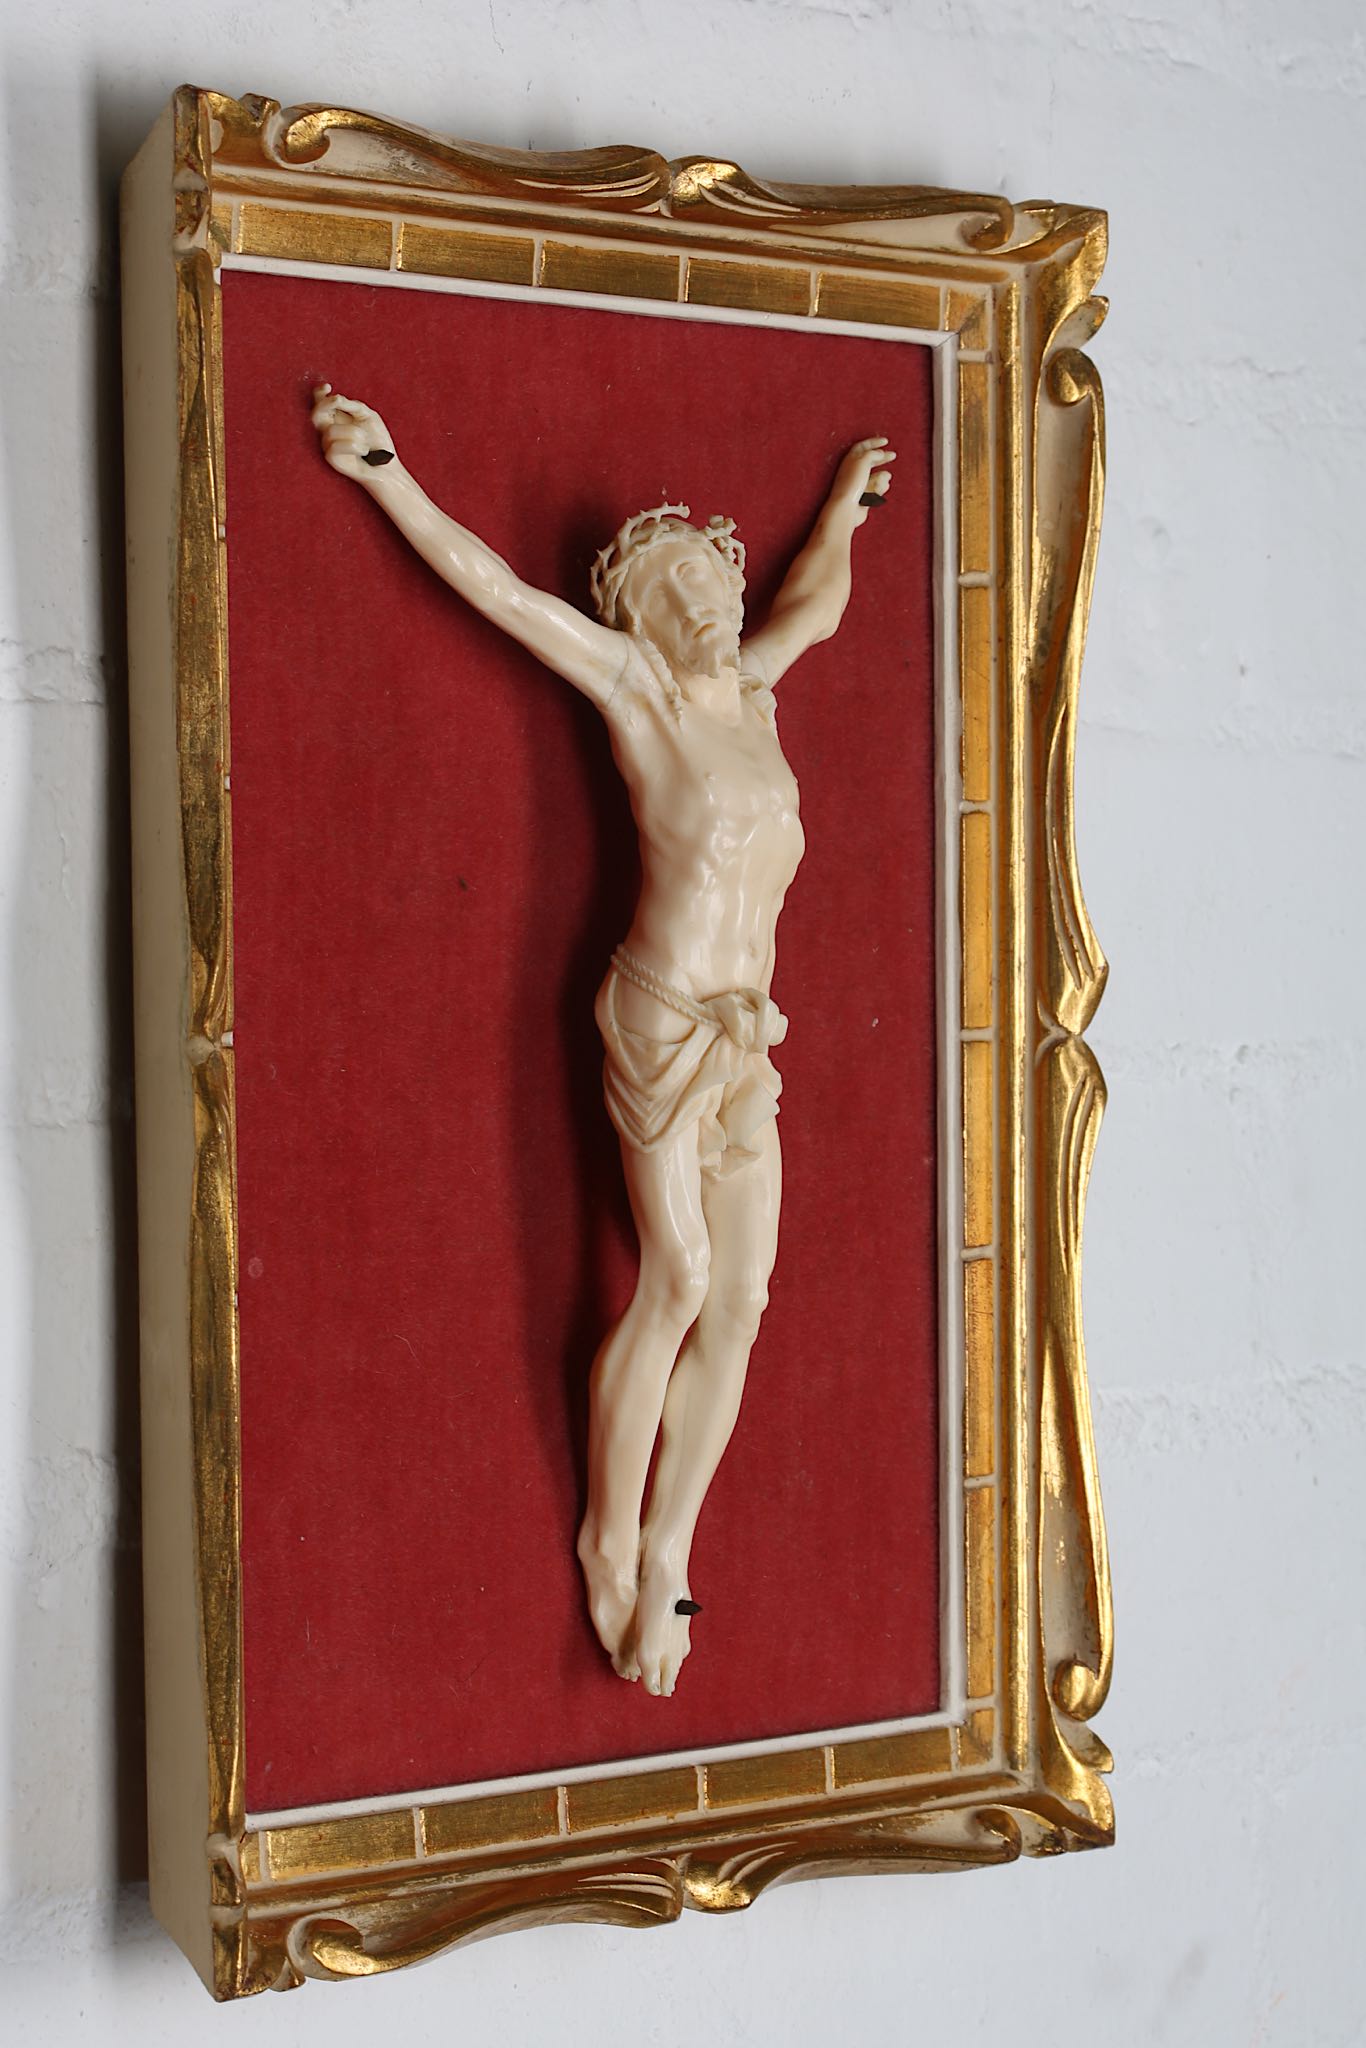 TWO 19TH CENTURY NORTH EUROPEAN IVORY CORPUS CHRISTIS both of similar form with Christ's head turned - Image 3 of 5